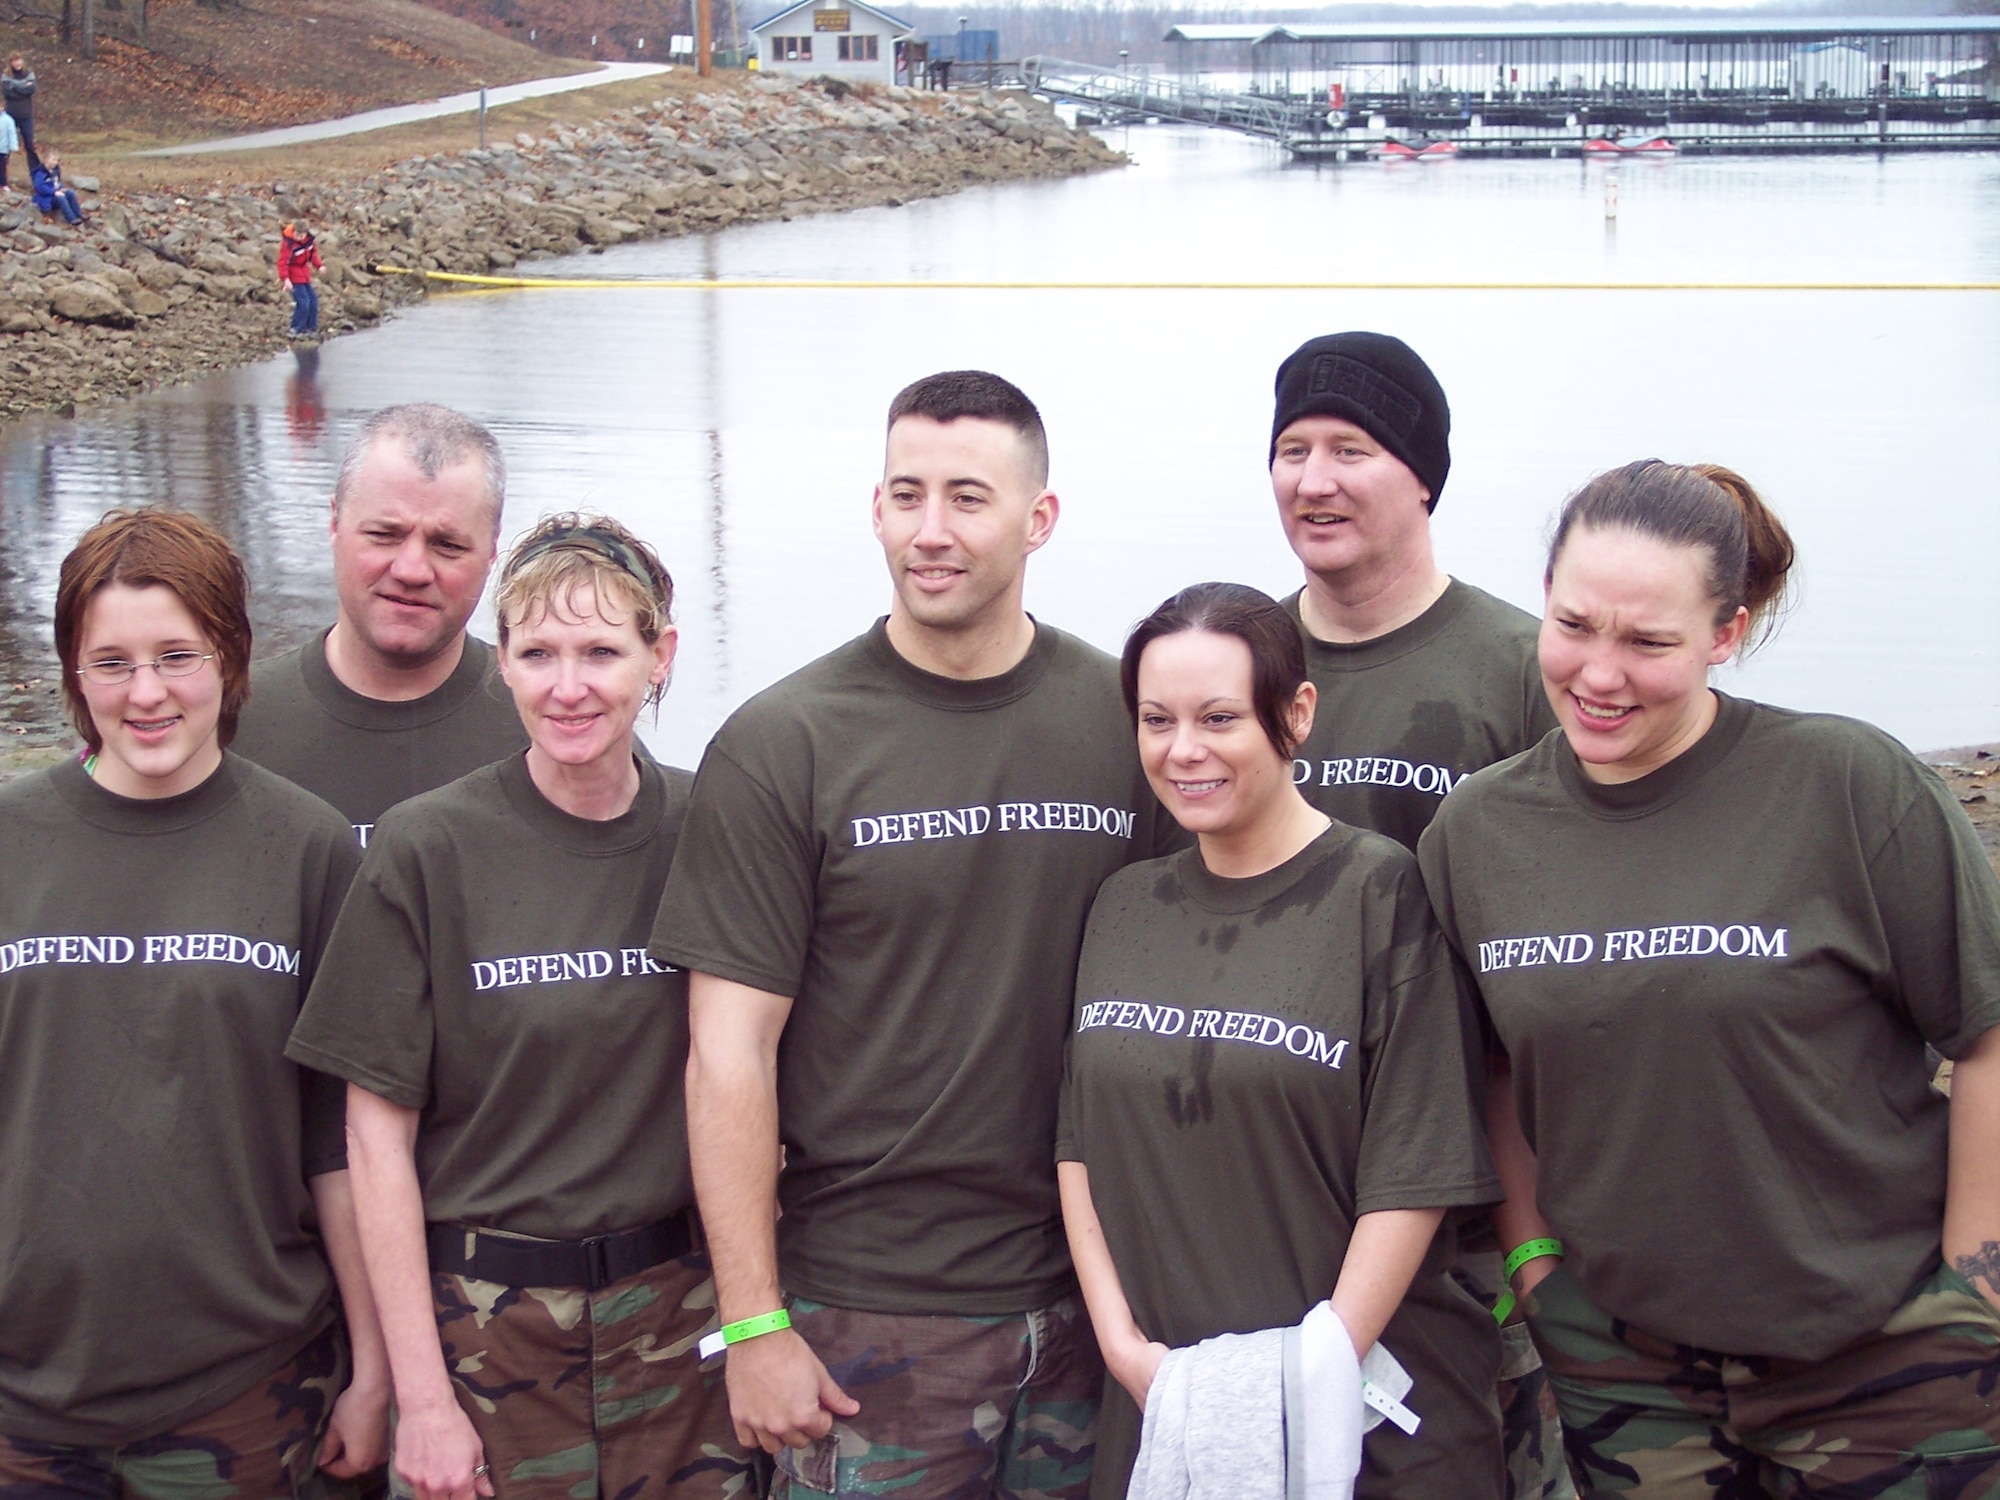 First Attack Team in their Missouri Guard shirts at the Special Olympics Polar Bear Plunge 2007.  From Left: Elizabeth Christie, Staff Sgt. Doug Christie, Spc. Amelia Martin, Capt. Paul Howerton, Staff Sgt. Amy Smith, Sgt.1st Class Cameron Beck and Spc. Jessica Dickie.  (Photo printed with permission of Sgt. 1st Class Cameron) 